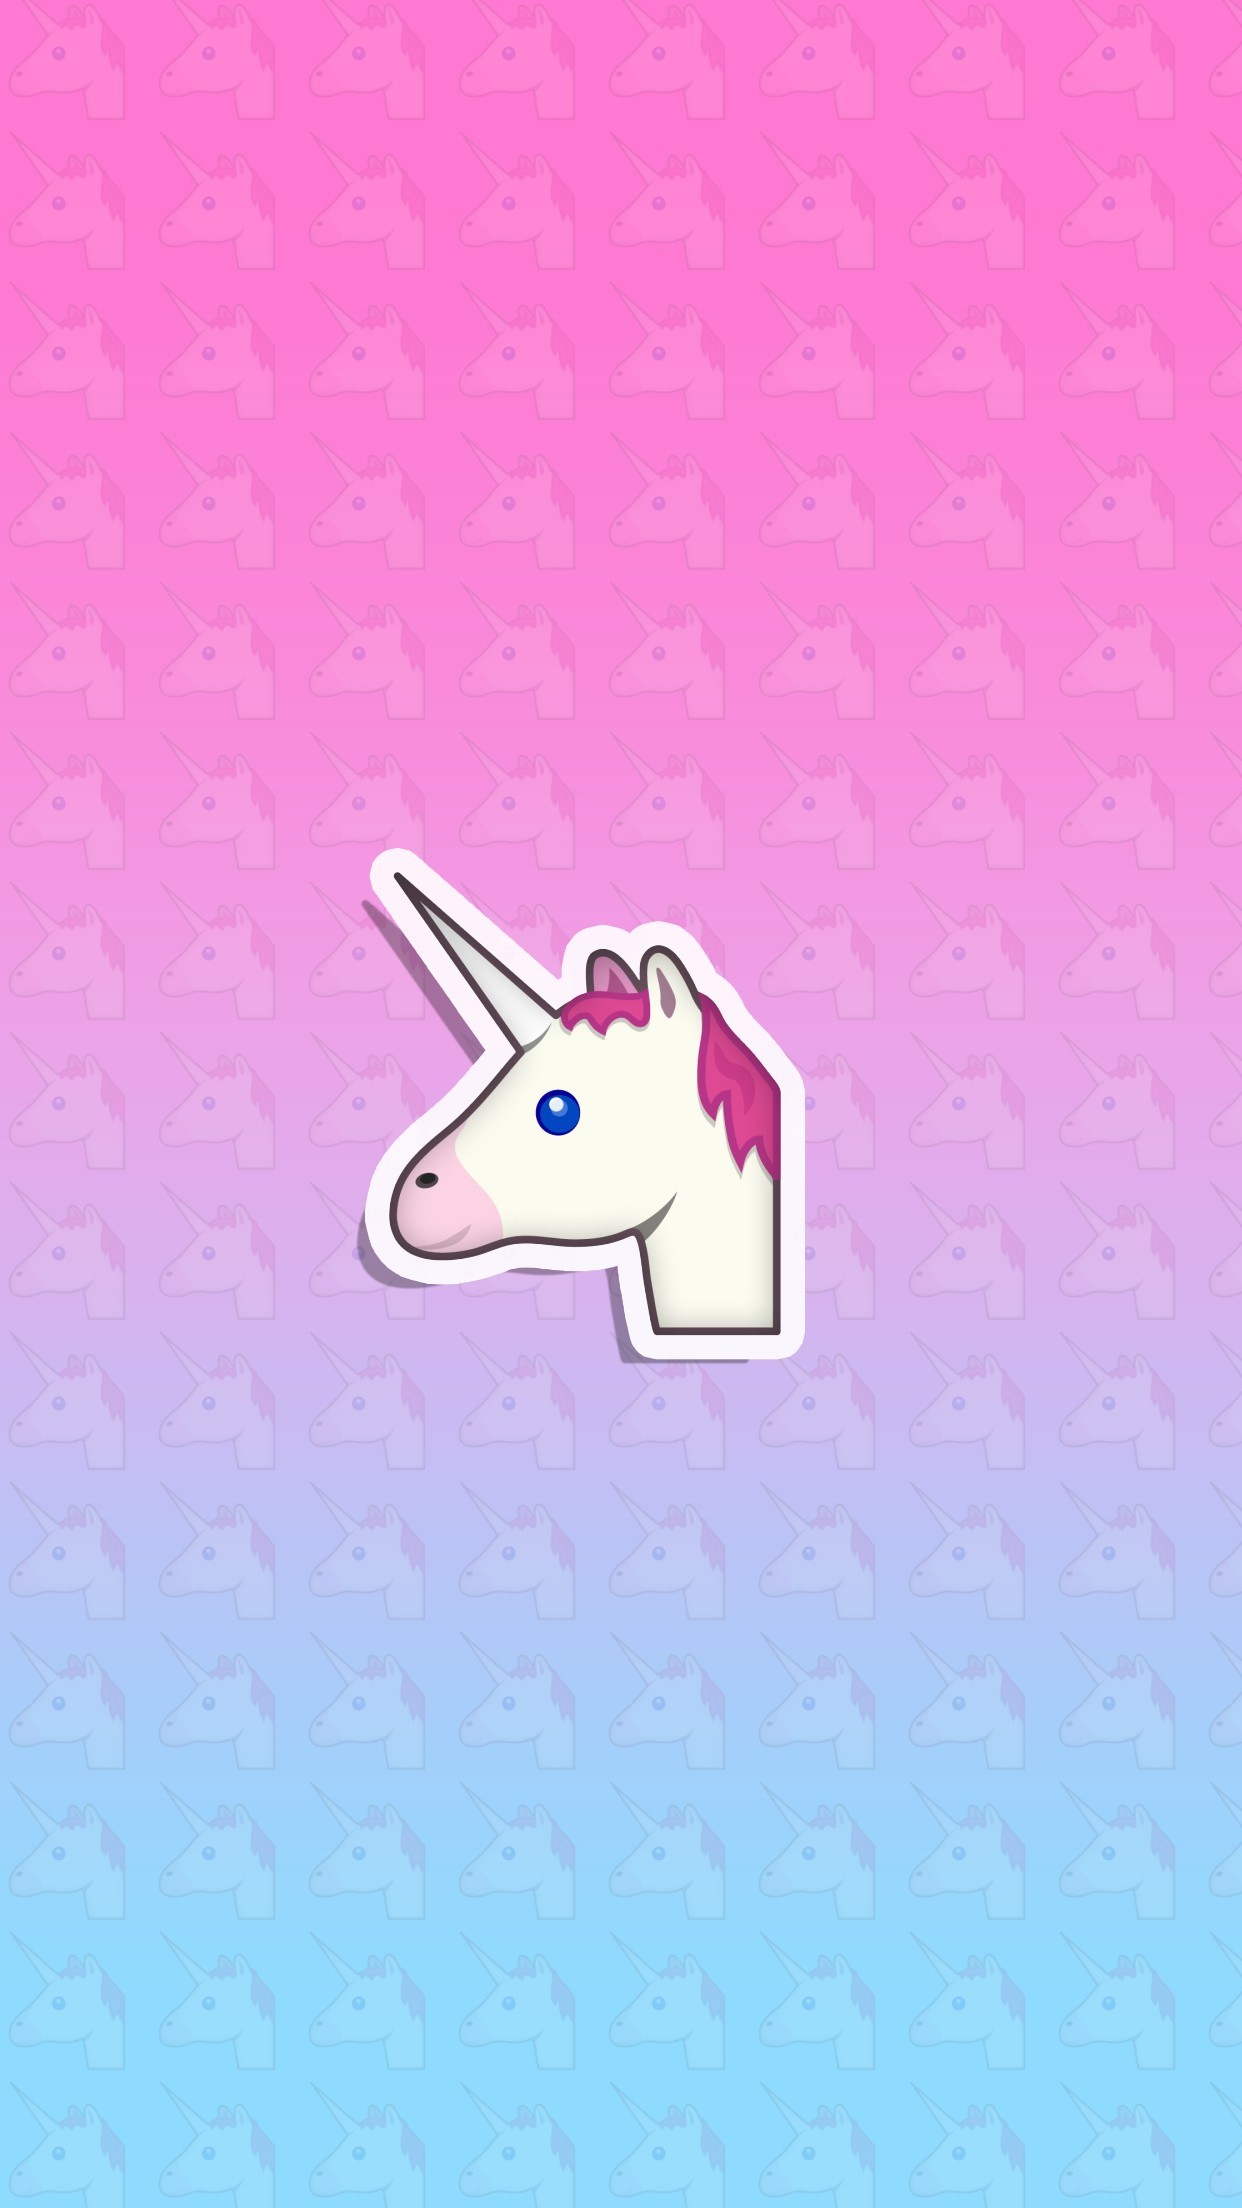 Wallpaper, background, iPhone, Android, HD, unicorn, Pink, Blue,